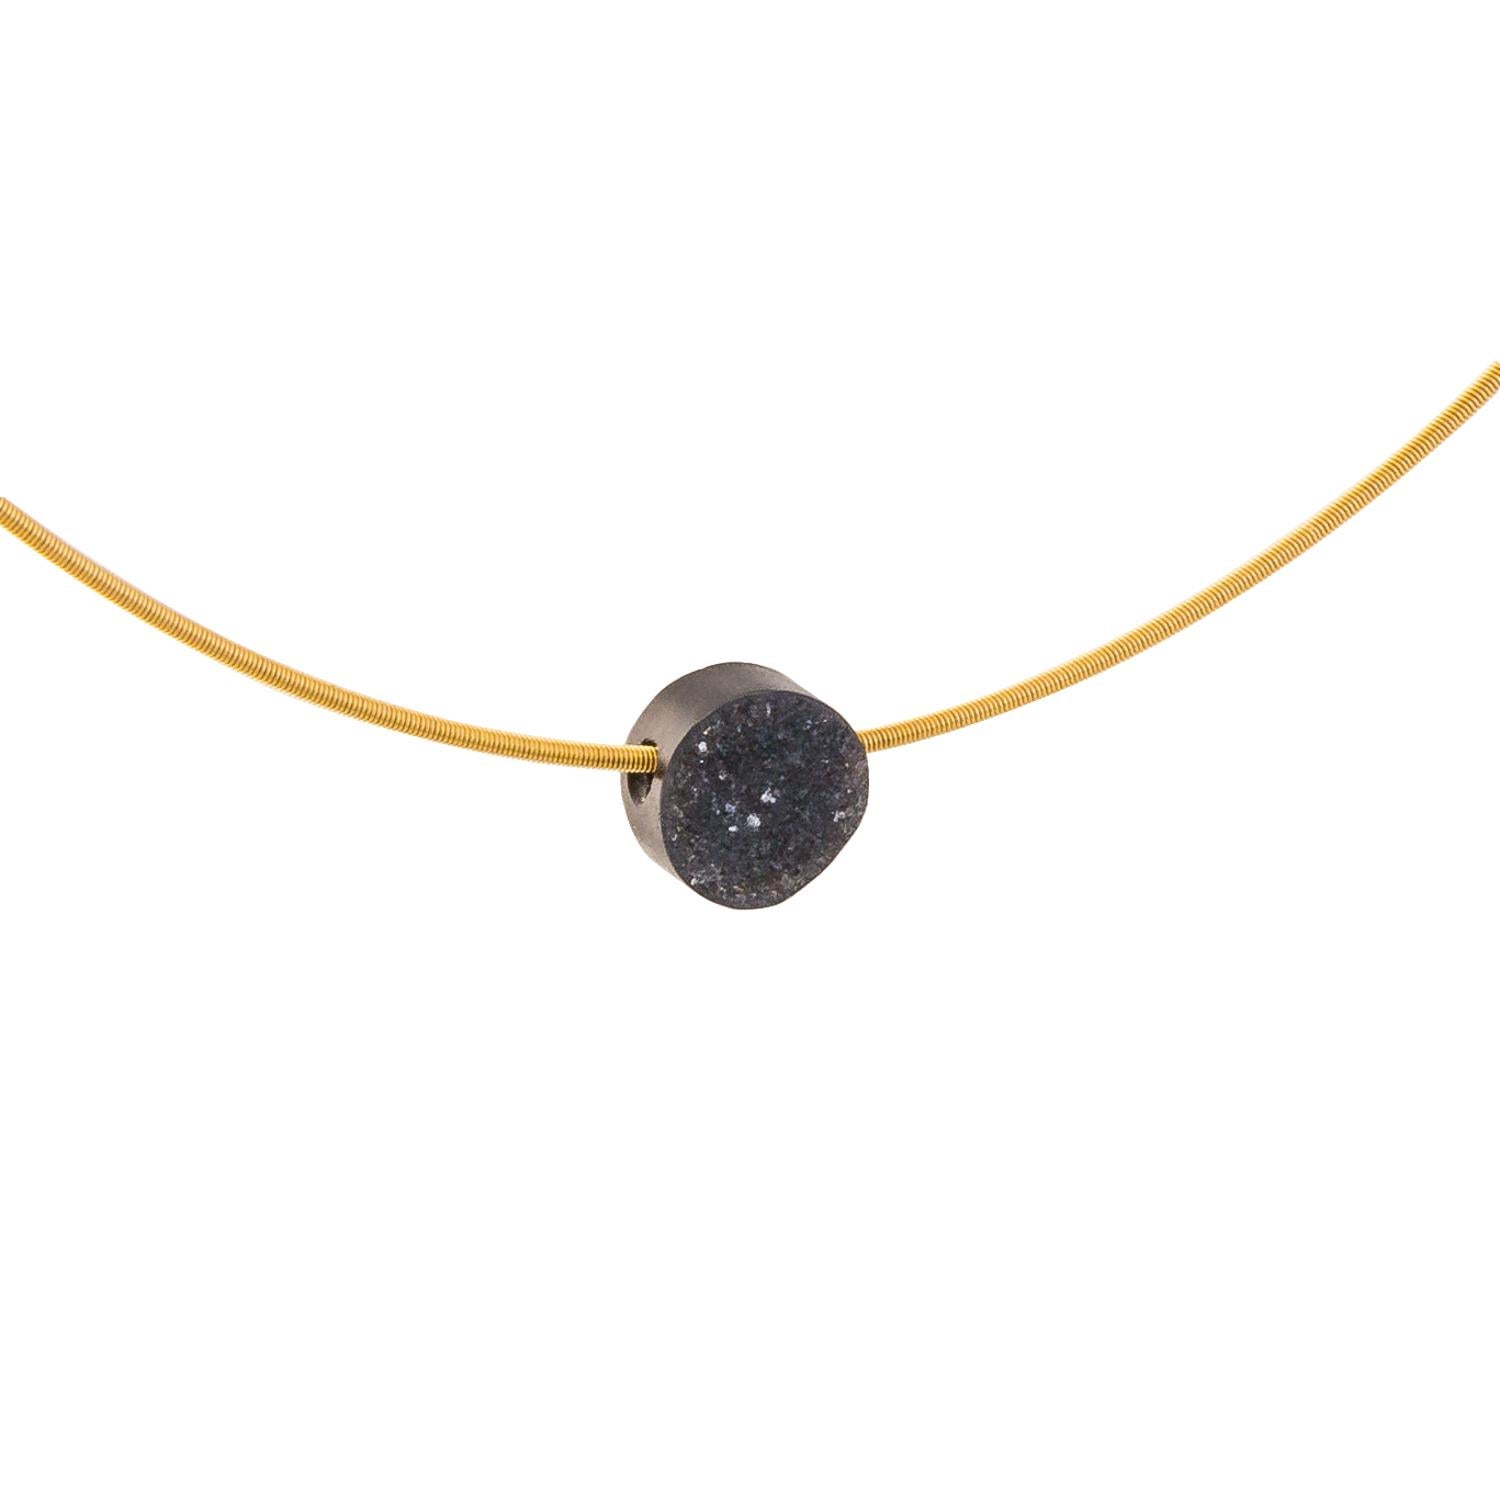 Sourced from the inside of a geode this Black Onyx Drusy gem is suspended on an 18 karat yellow gold circular style necklace. 

A geode is a hollow shell of stone, lined with crystals pointing toward the centre. Drusy is name given to the glittering